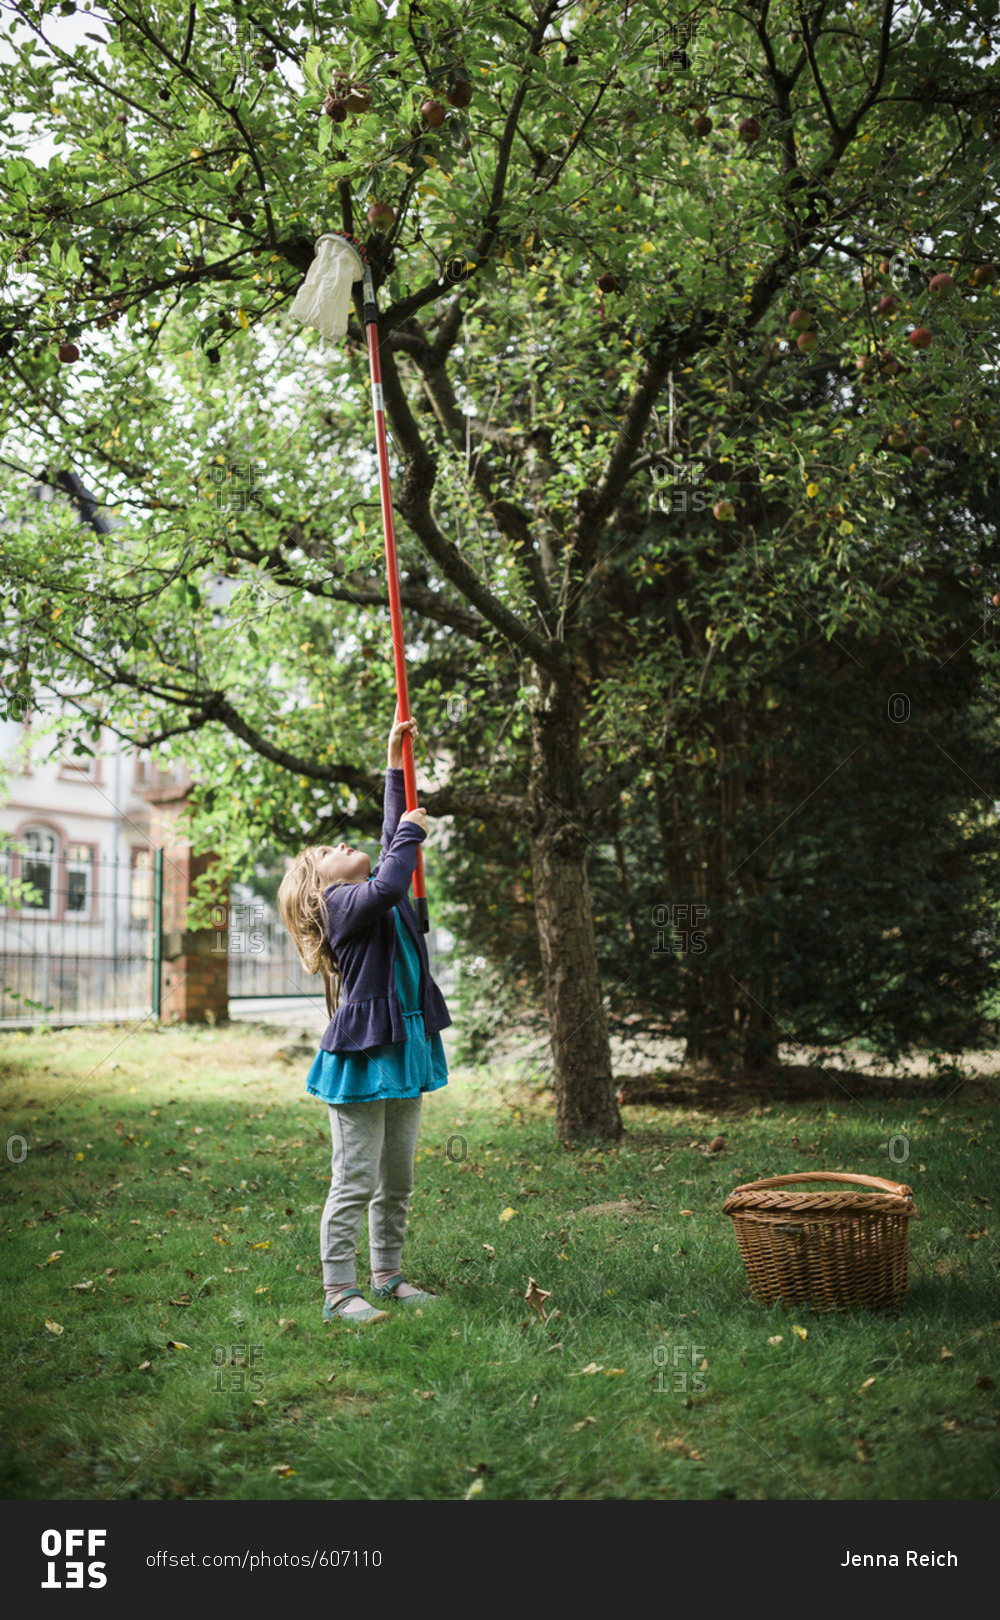 Girl using fruit picker on long pole to harvest apples from tree